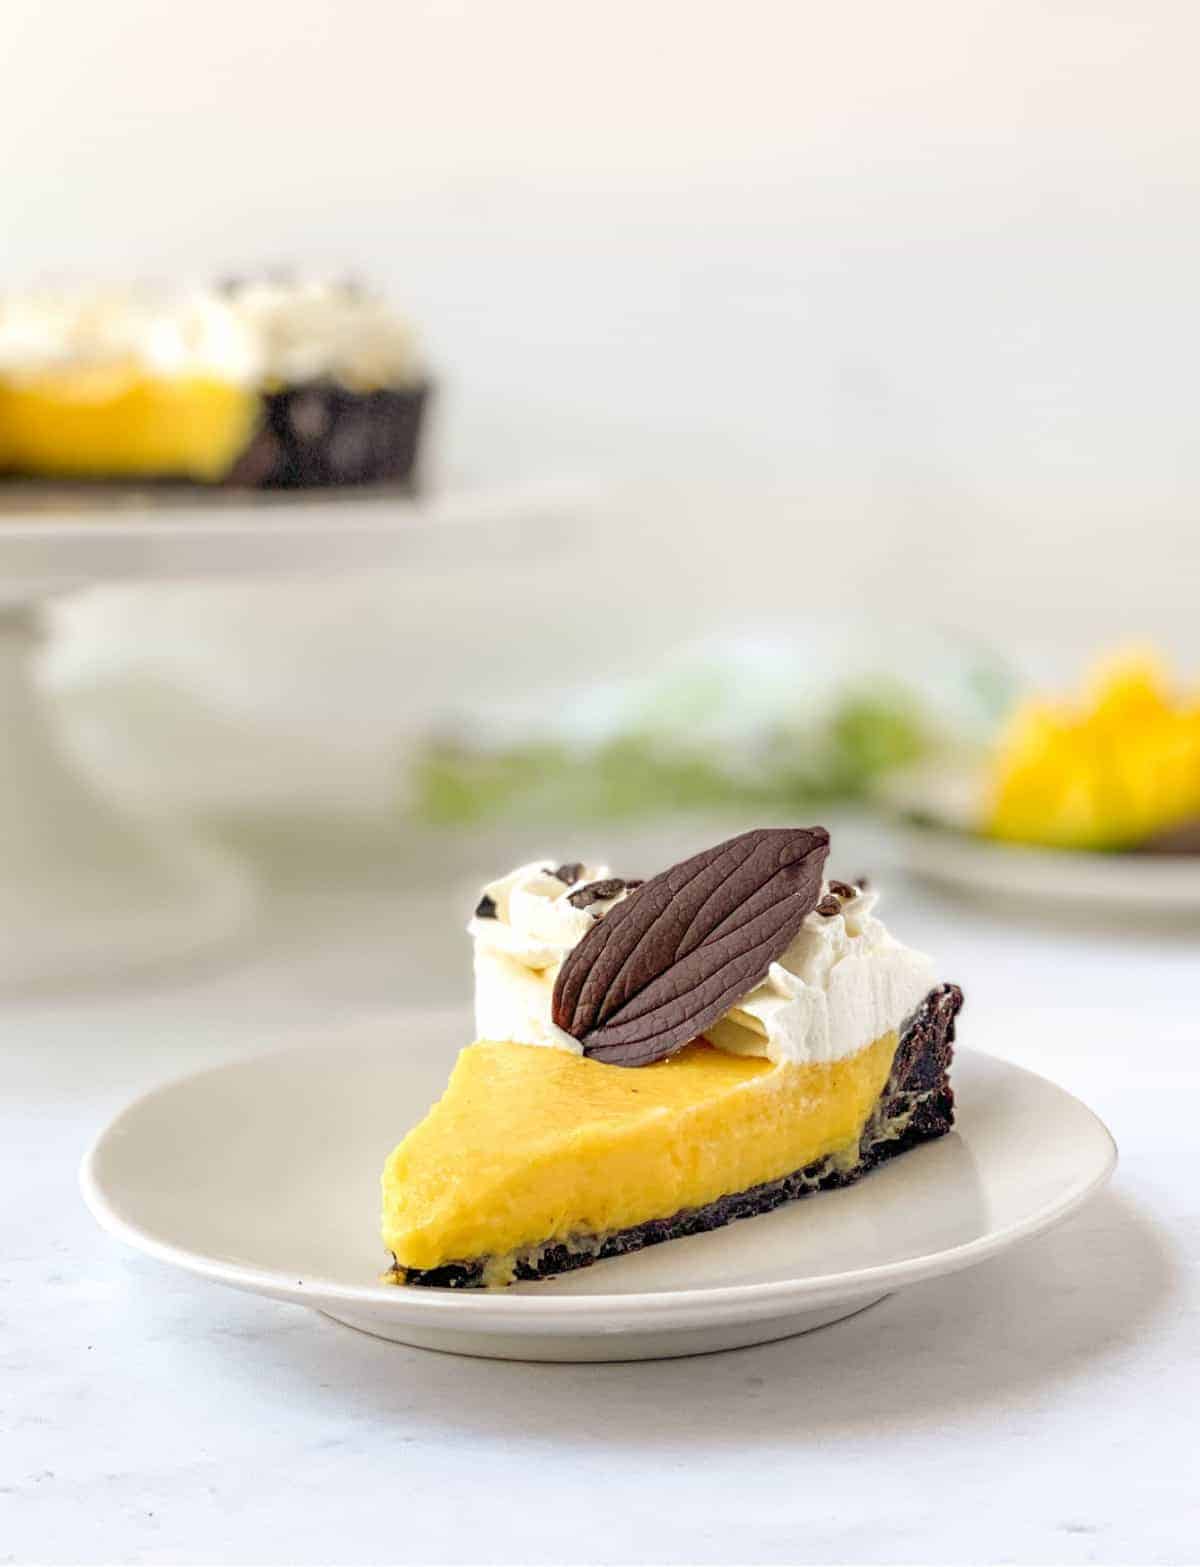 Slice of Chocolate Mango Tart on a white plate with whipped cream and a chocolate leaf on top.